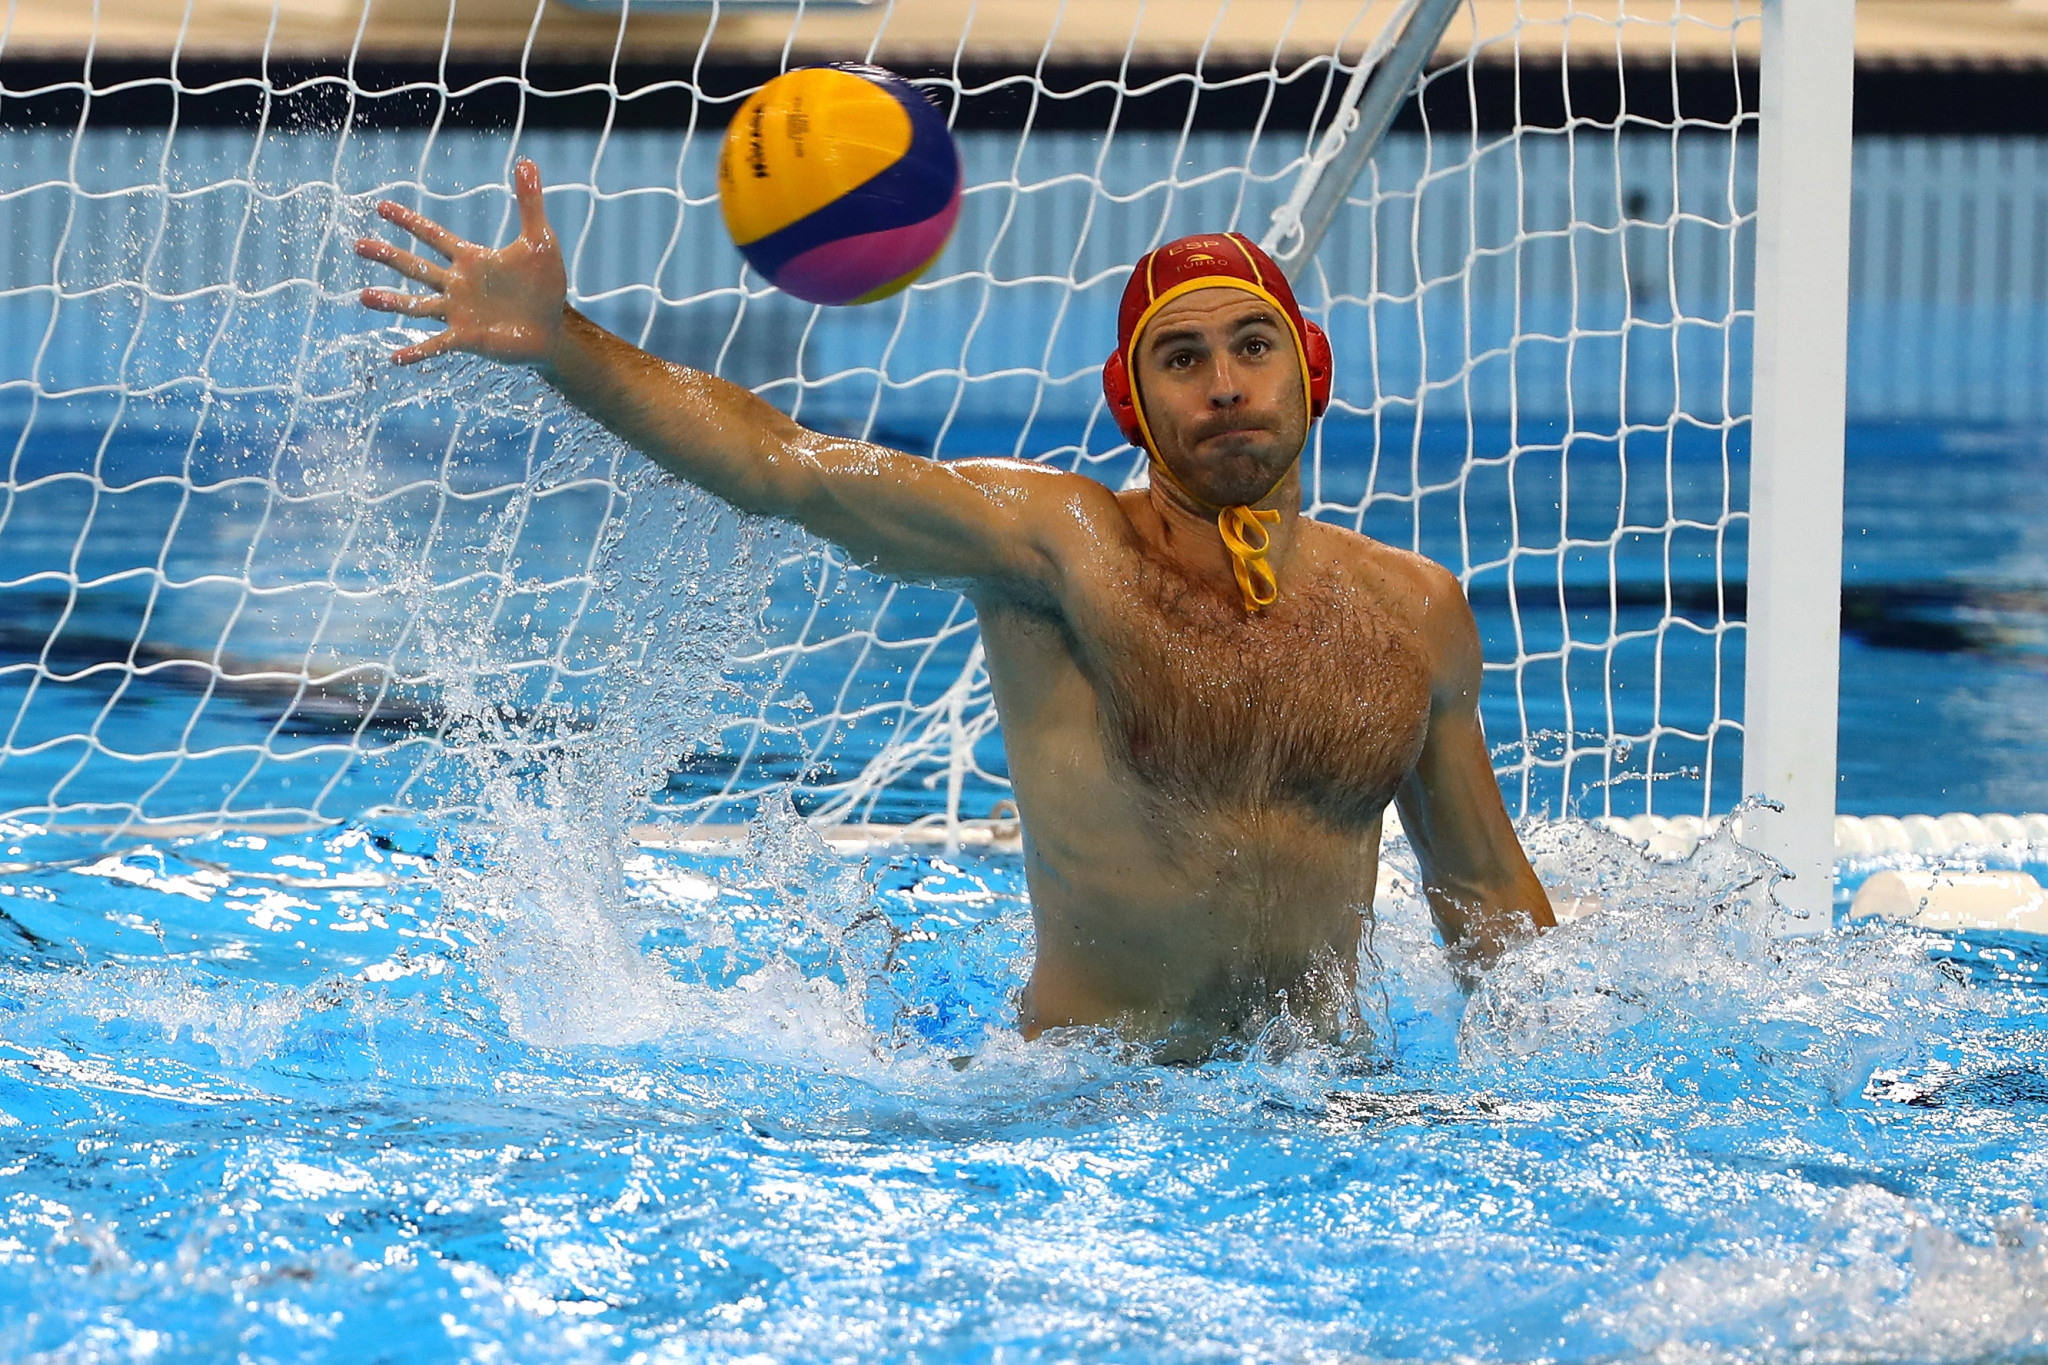 Spain to meet defending champions Serbia in Men's European Water Polo Championship quarter-final